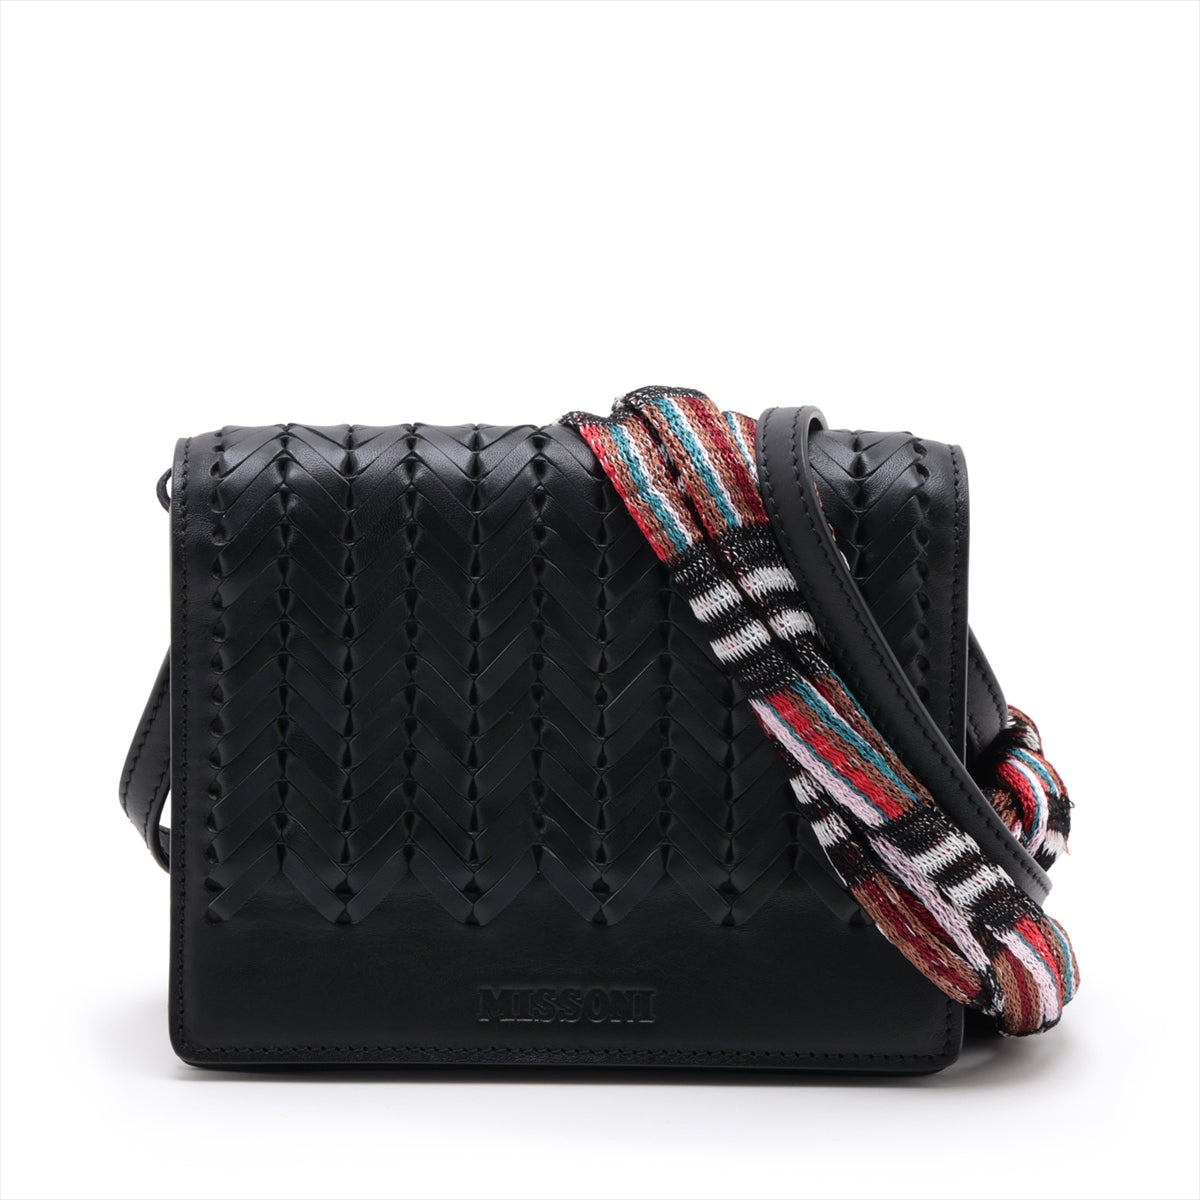 Missoni Leather 2 Way Shoulder Bag Black The attached fabric is slightly frayed